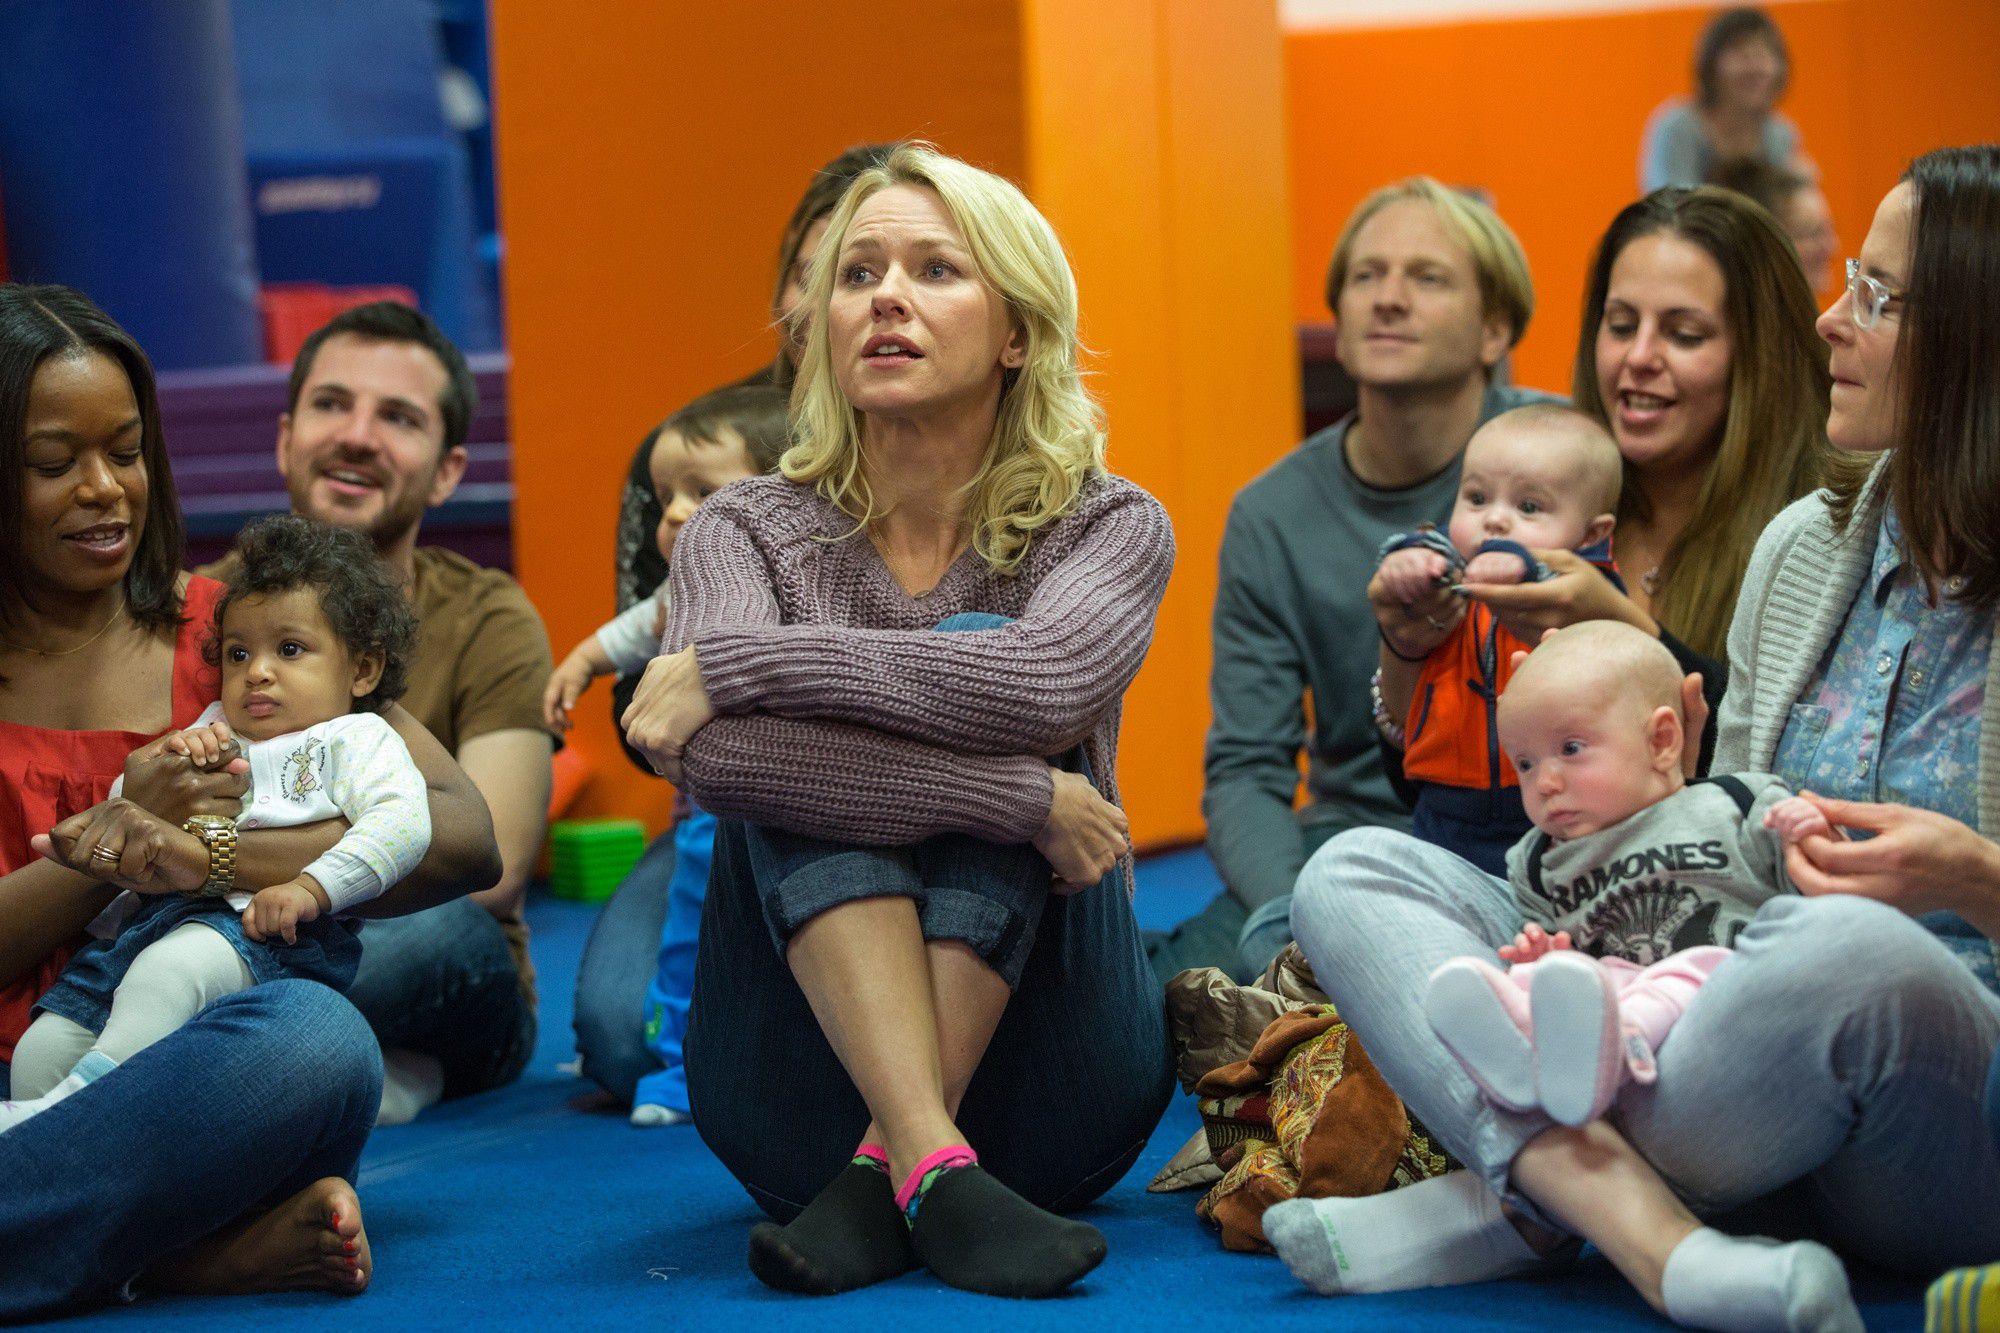 Naomi Watts stars as Cornelia in A24's While We're Young (2015)